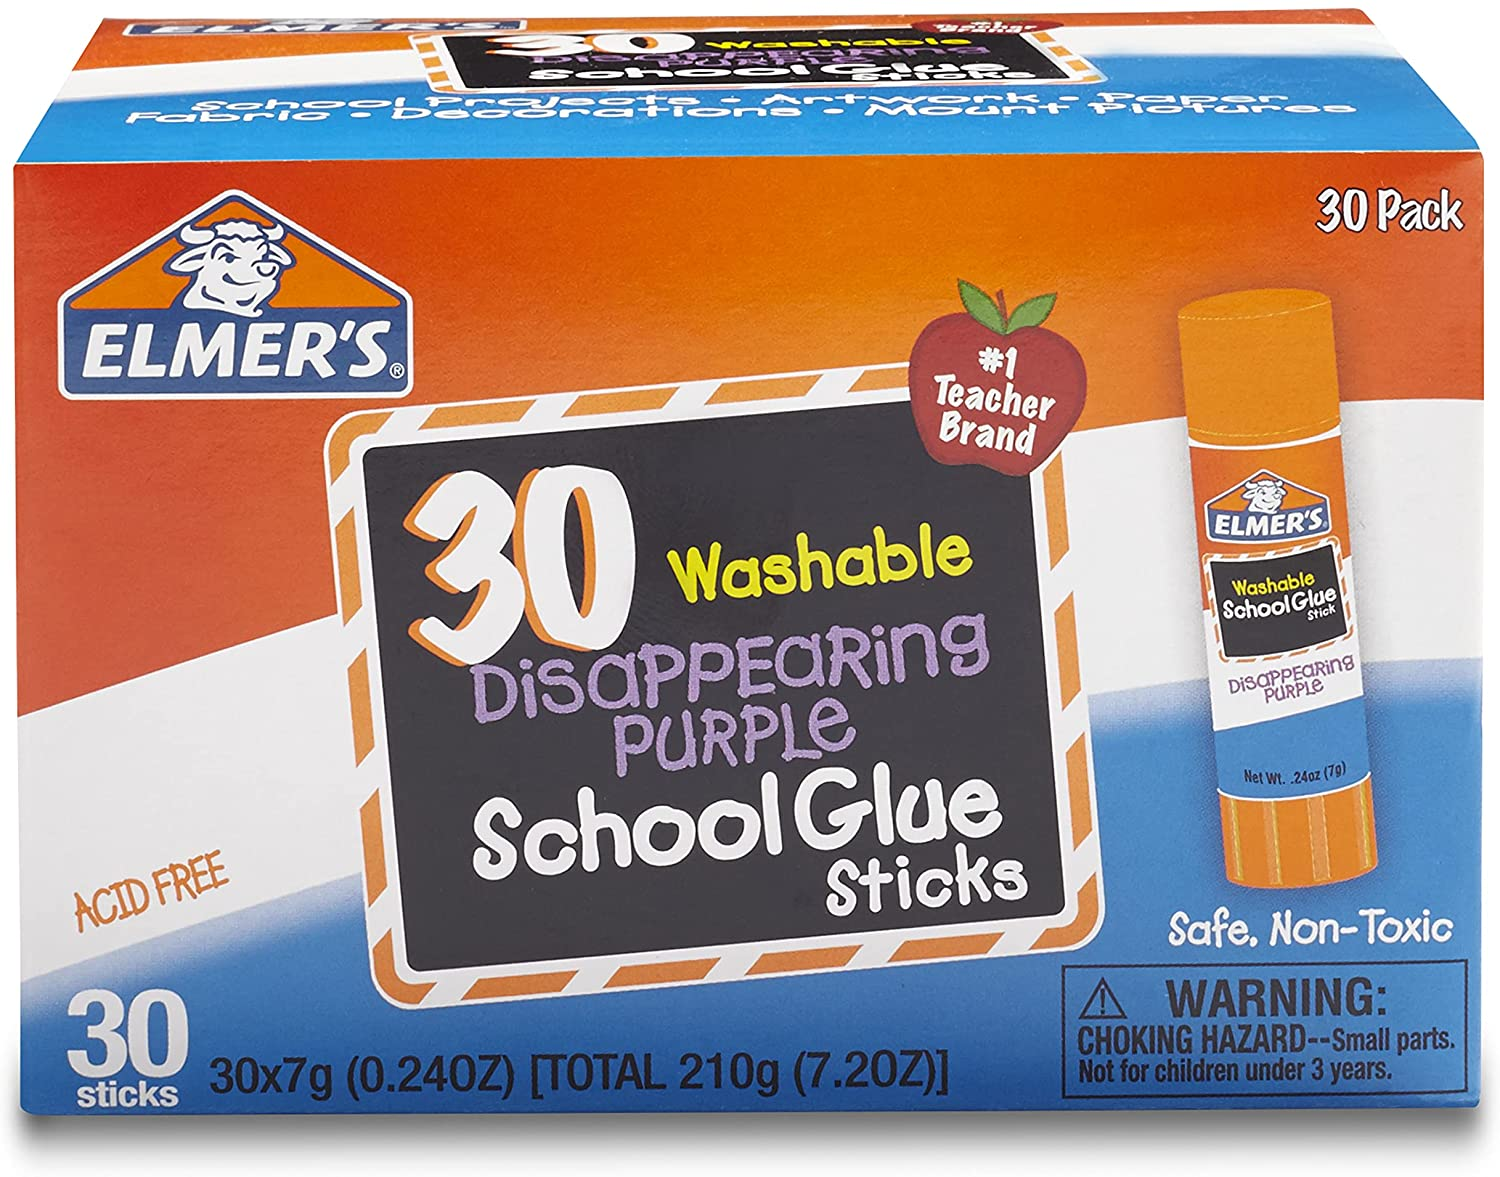 Amazon.com: Elmer's Disappearing Purple School Glue, Washable, 30 Pack, 0.24-ounce sticks : Everything Else $6.97